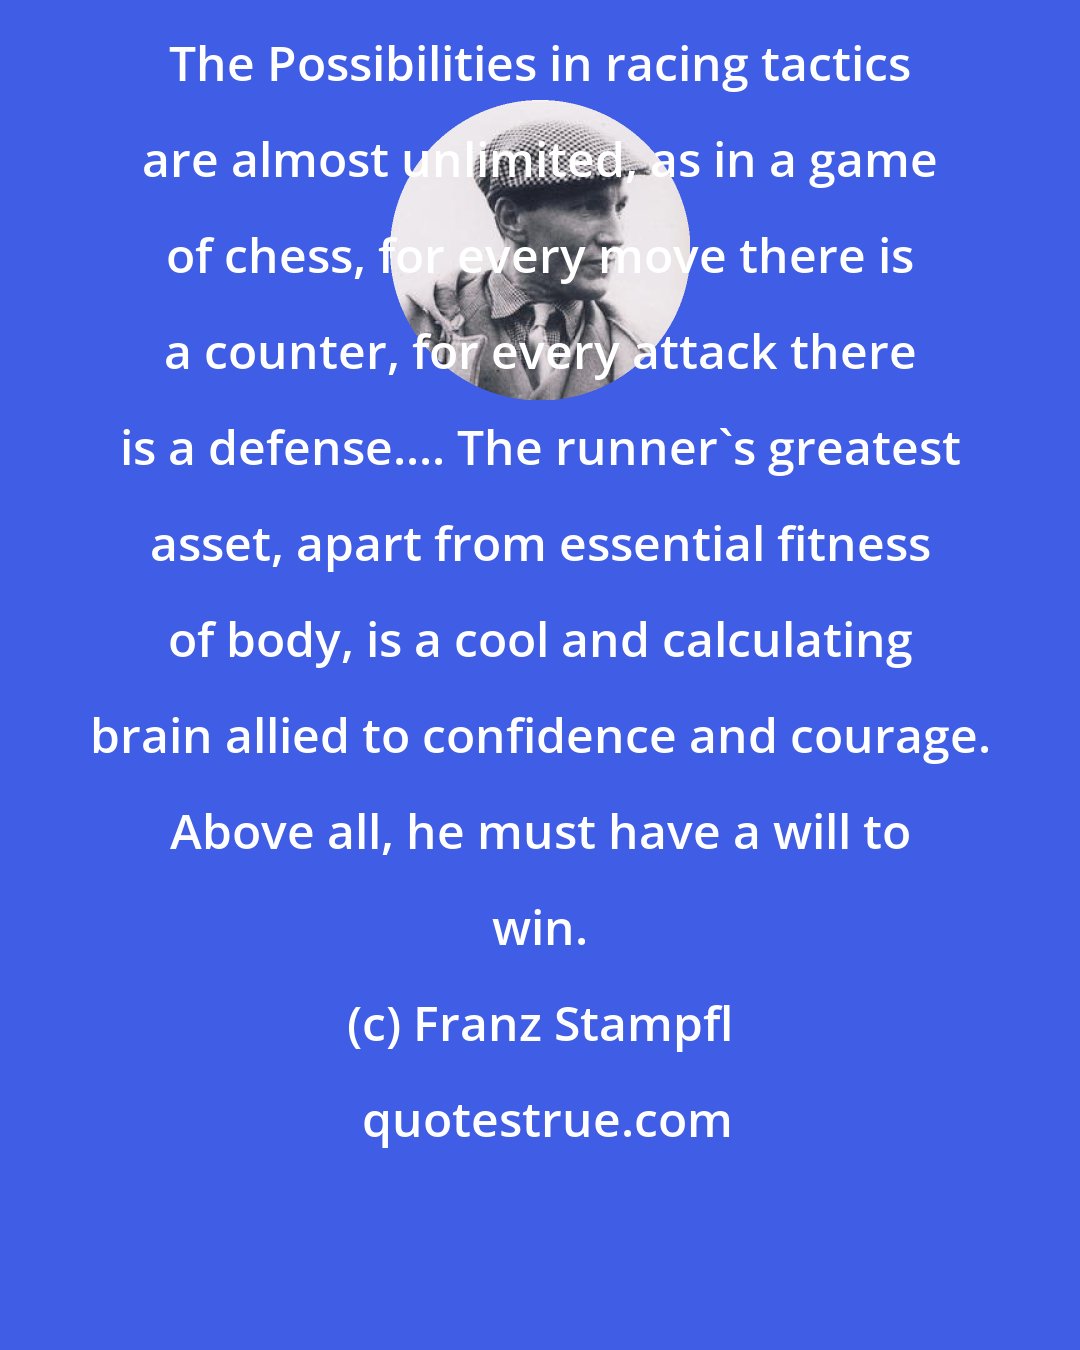 Franz Stampfl: The Possibilities in racing tactics are almost unlimited, as in a game of chess, for every move there is a counter, for every attack there is a defense.... The runner's greatest asset, apart from essential fitness of body, is a cool and calculating brain allied to confidence and courage. Above all, he must have a will to win.